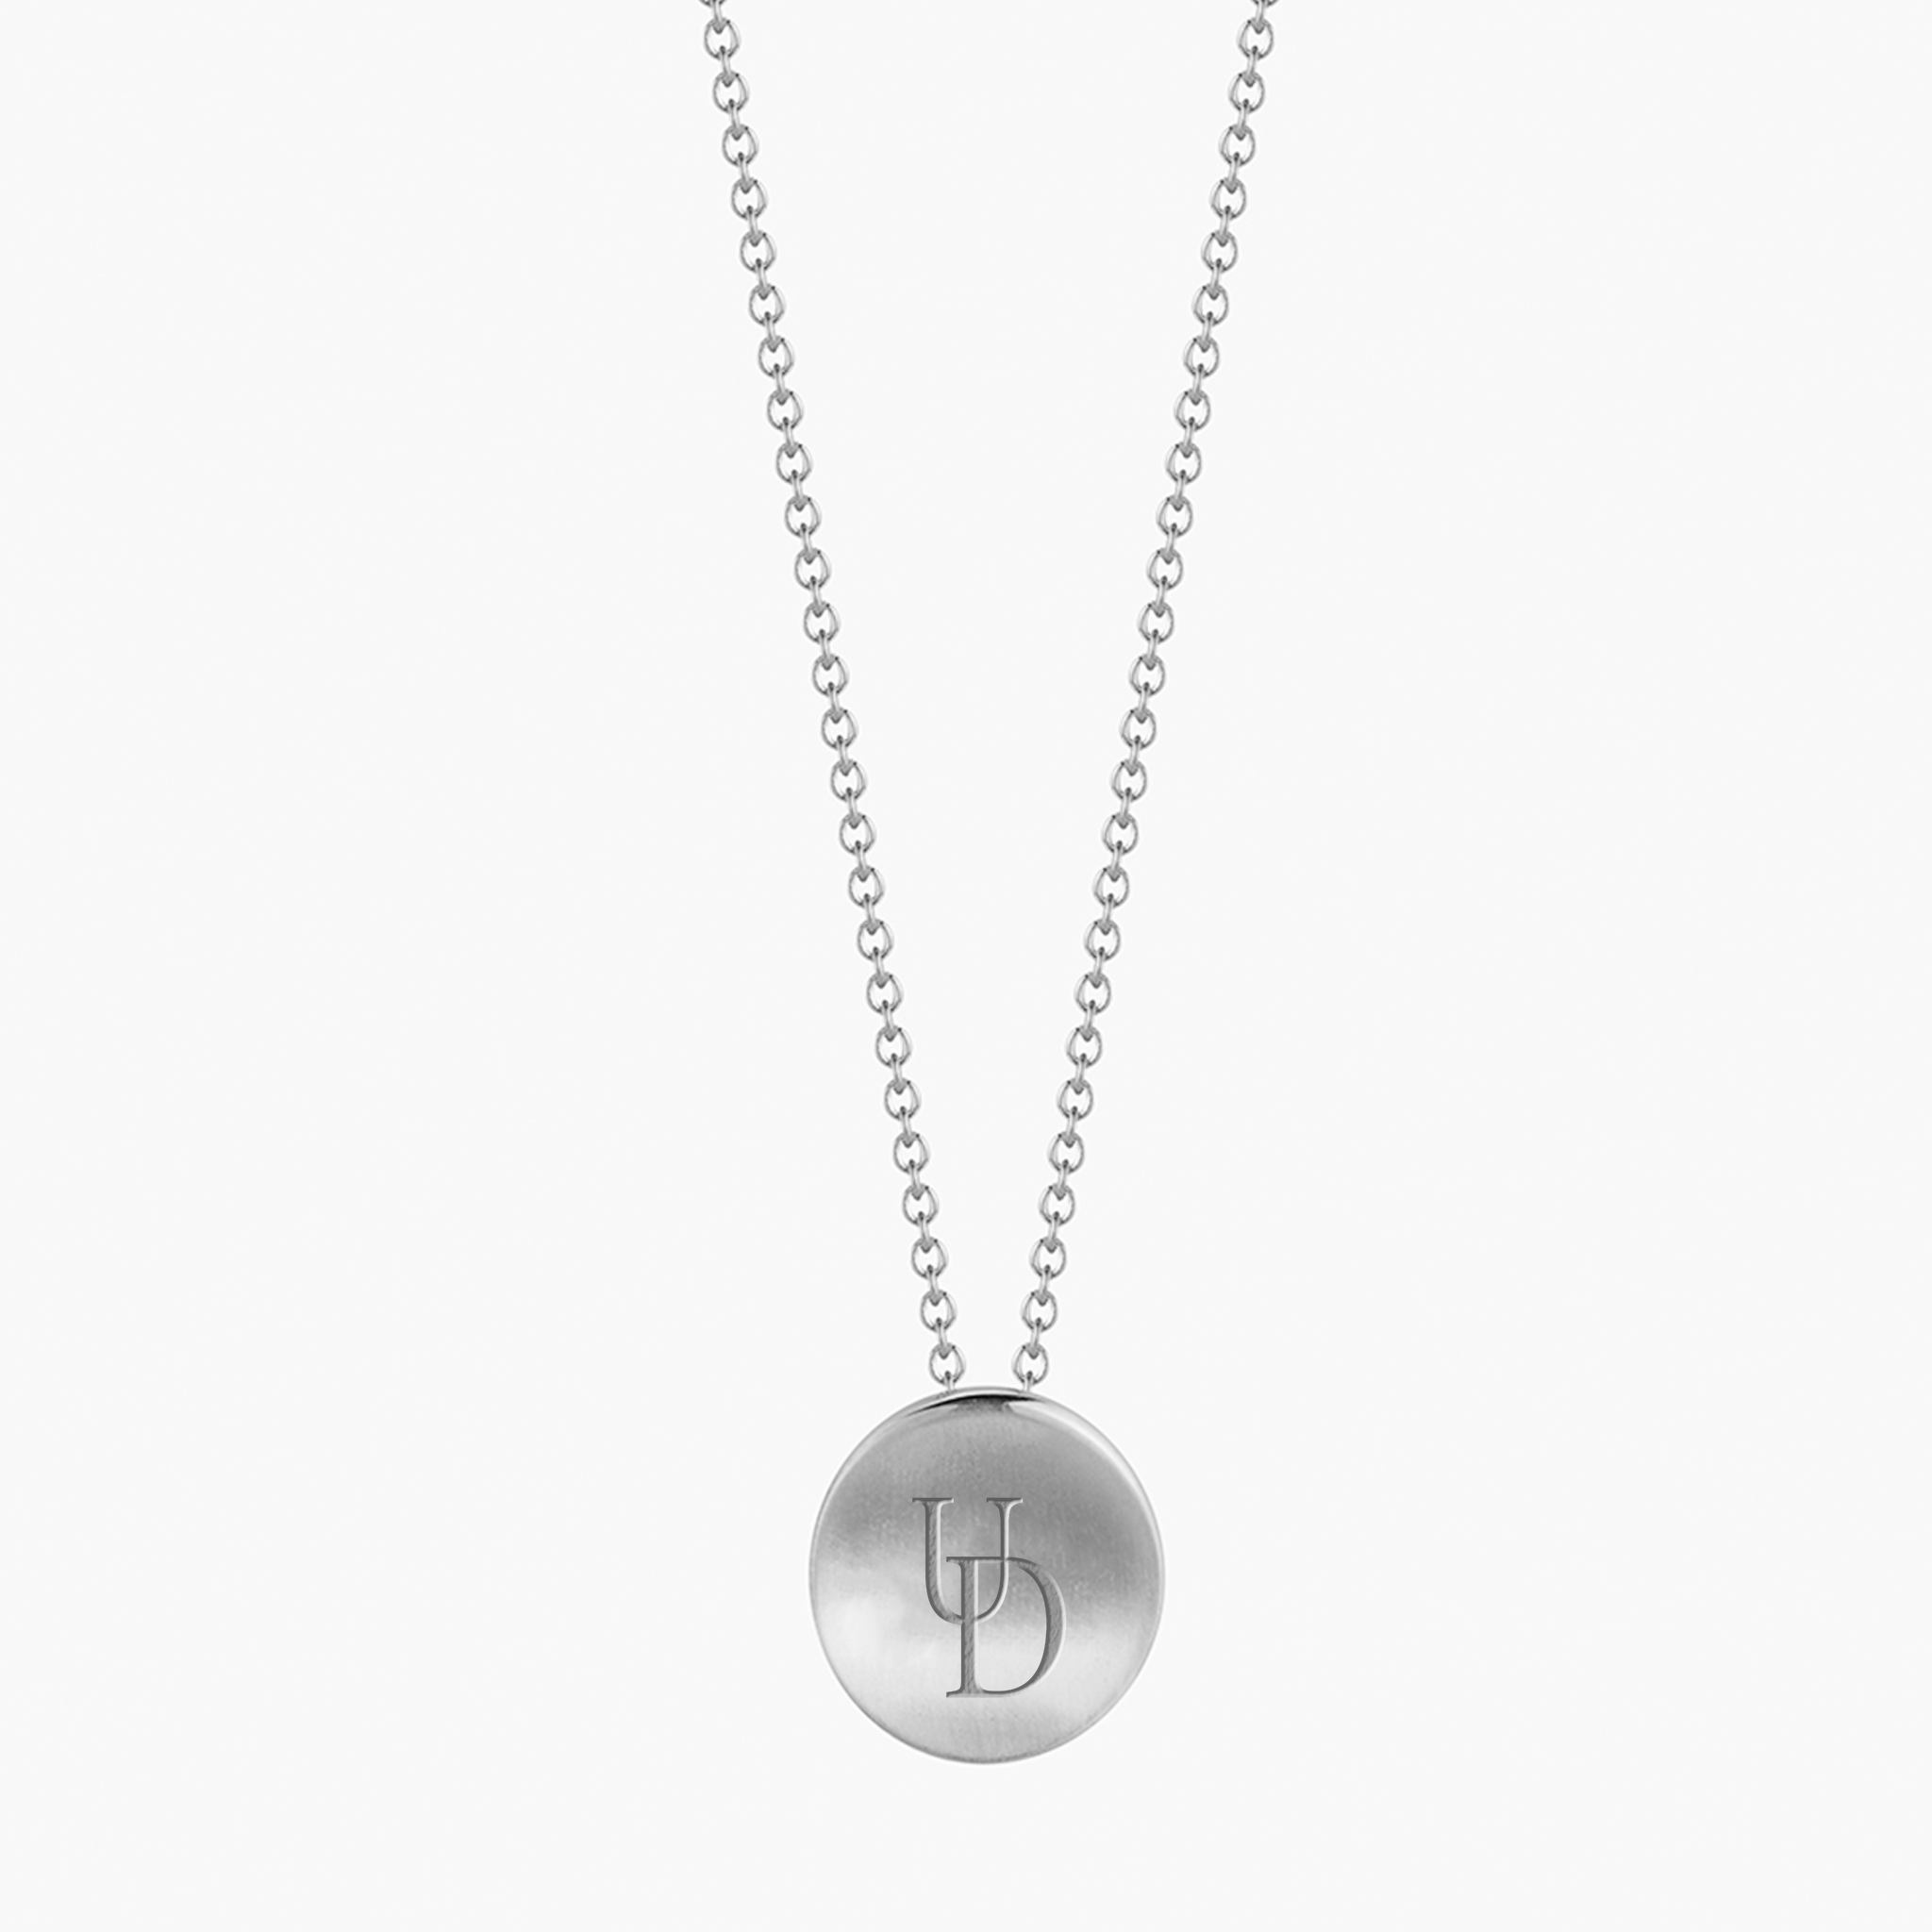 Petite Silver Initial Necklace | Posh Totty Designs